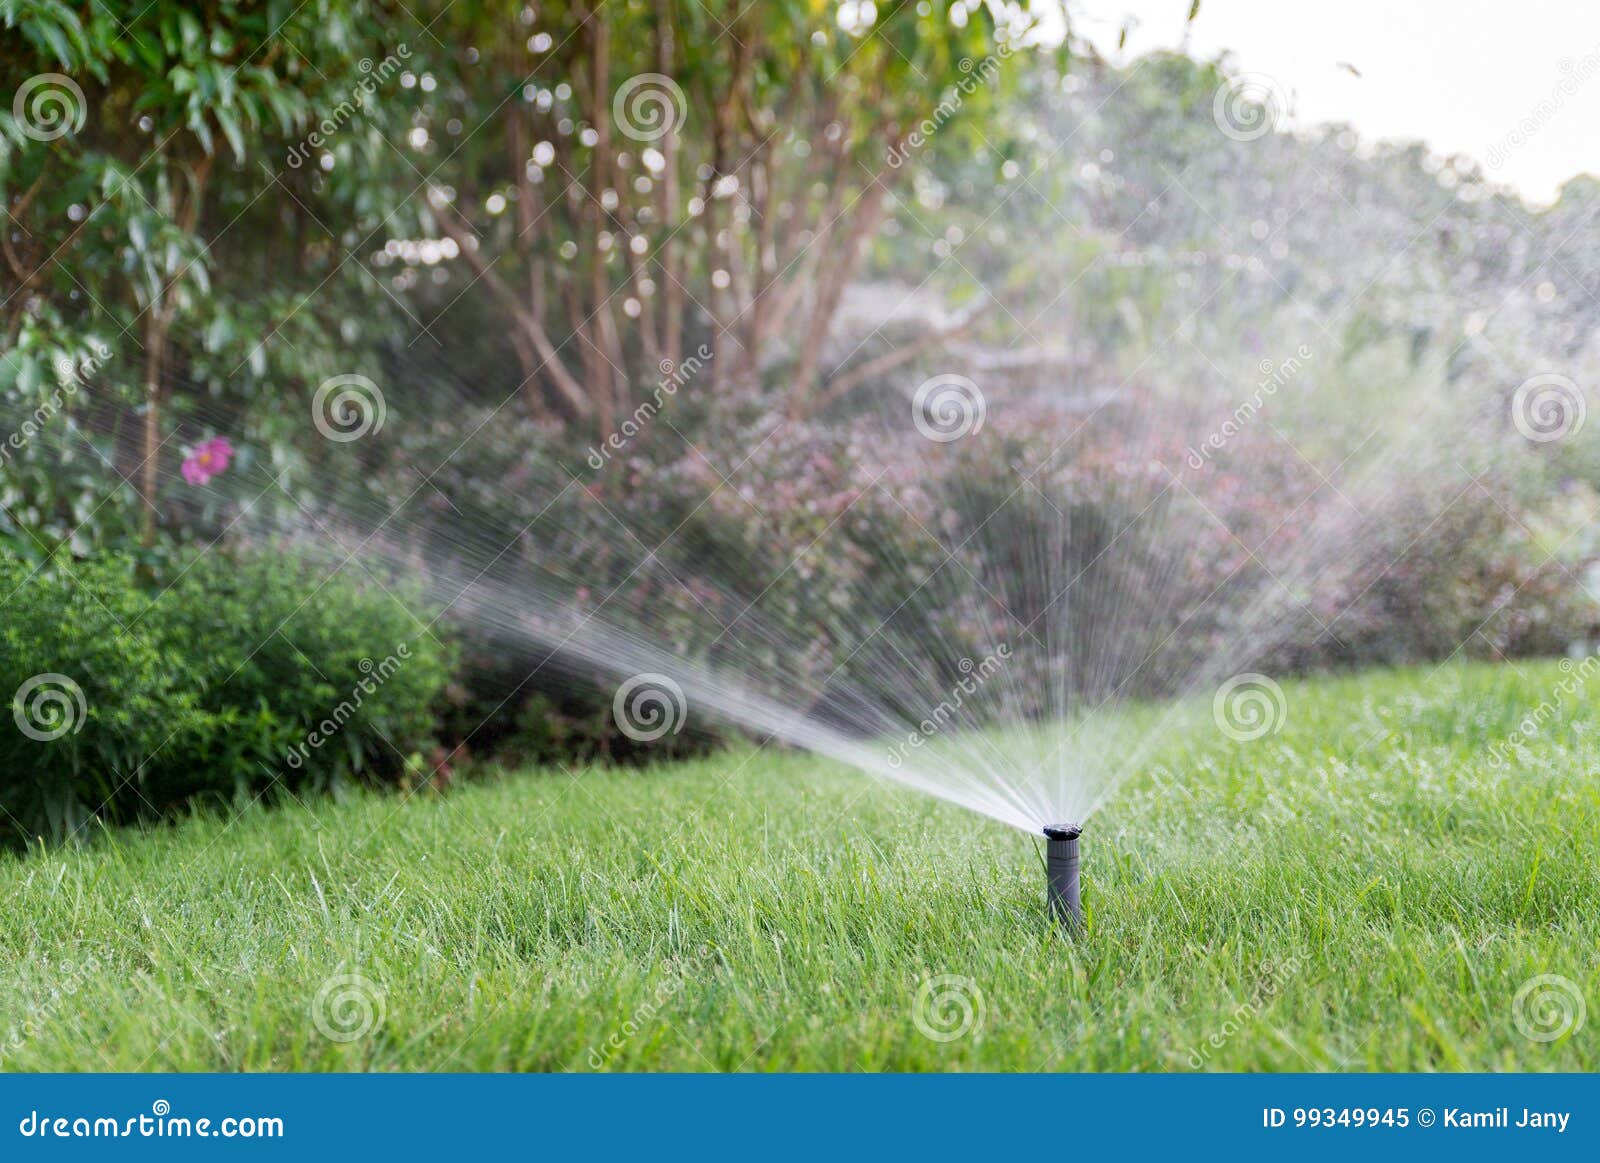 Irrigation Of The Garden With Sprinkler System Stock Image